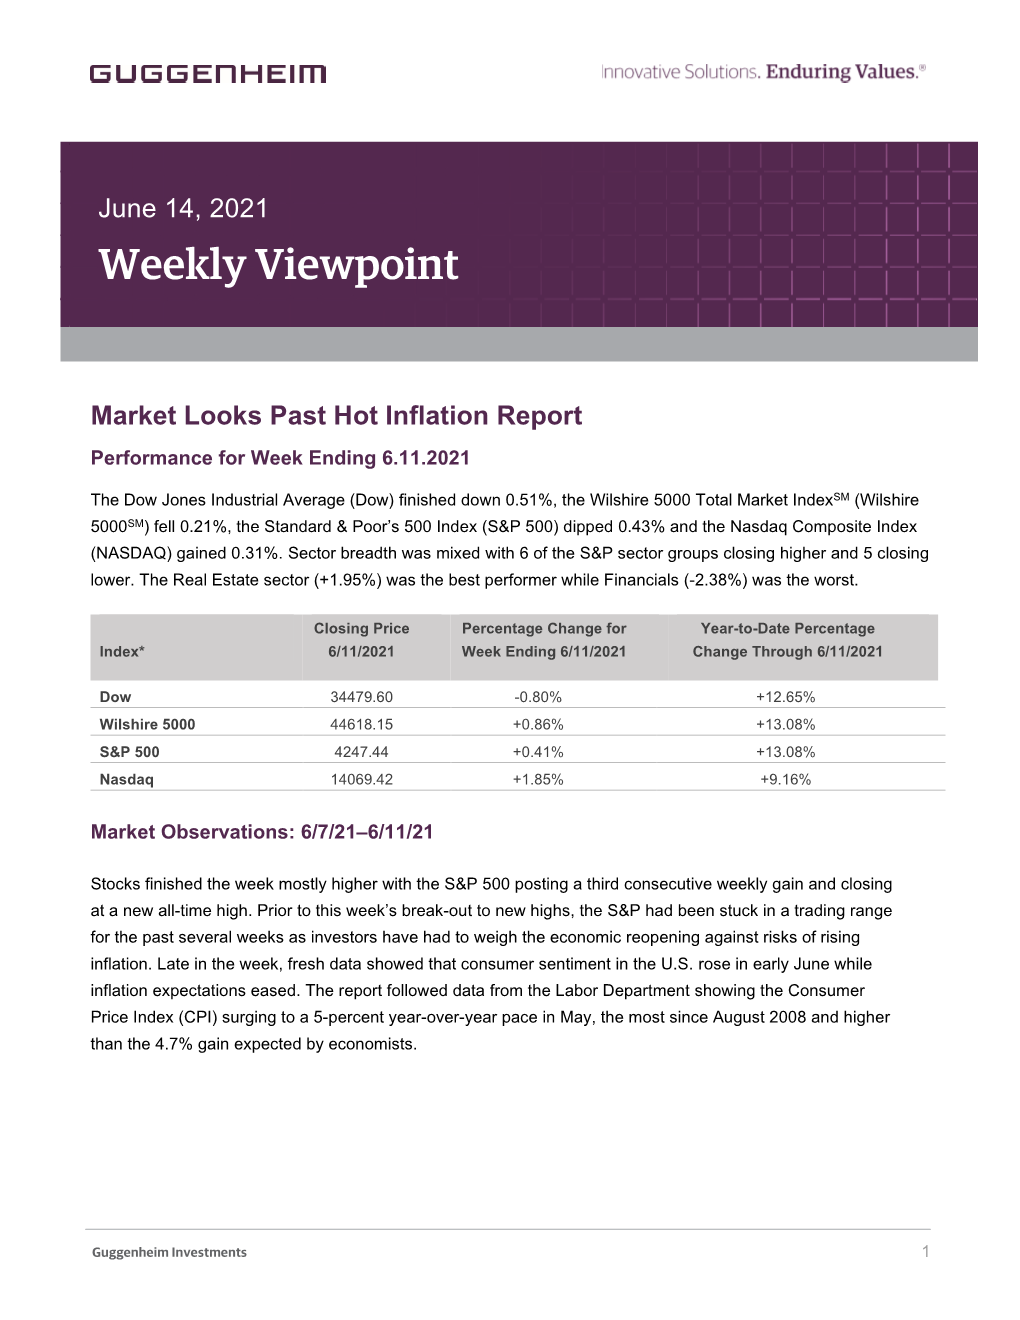 Weekly Viewpoint